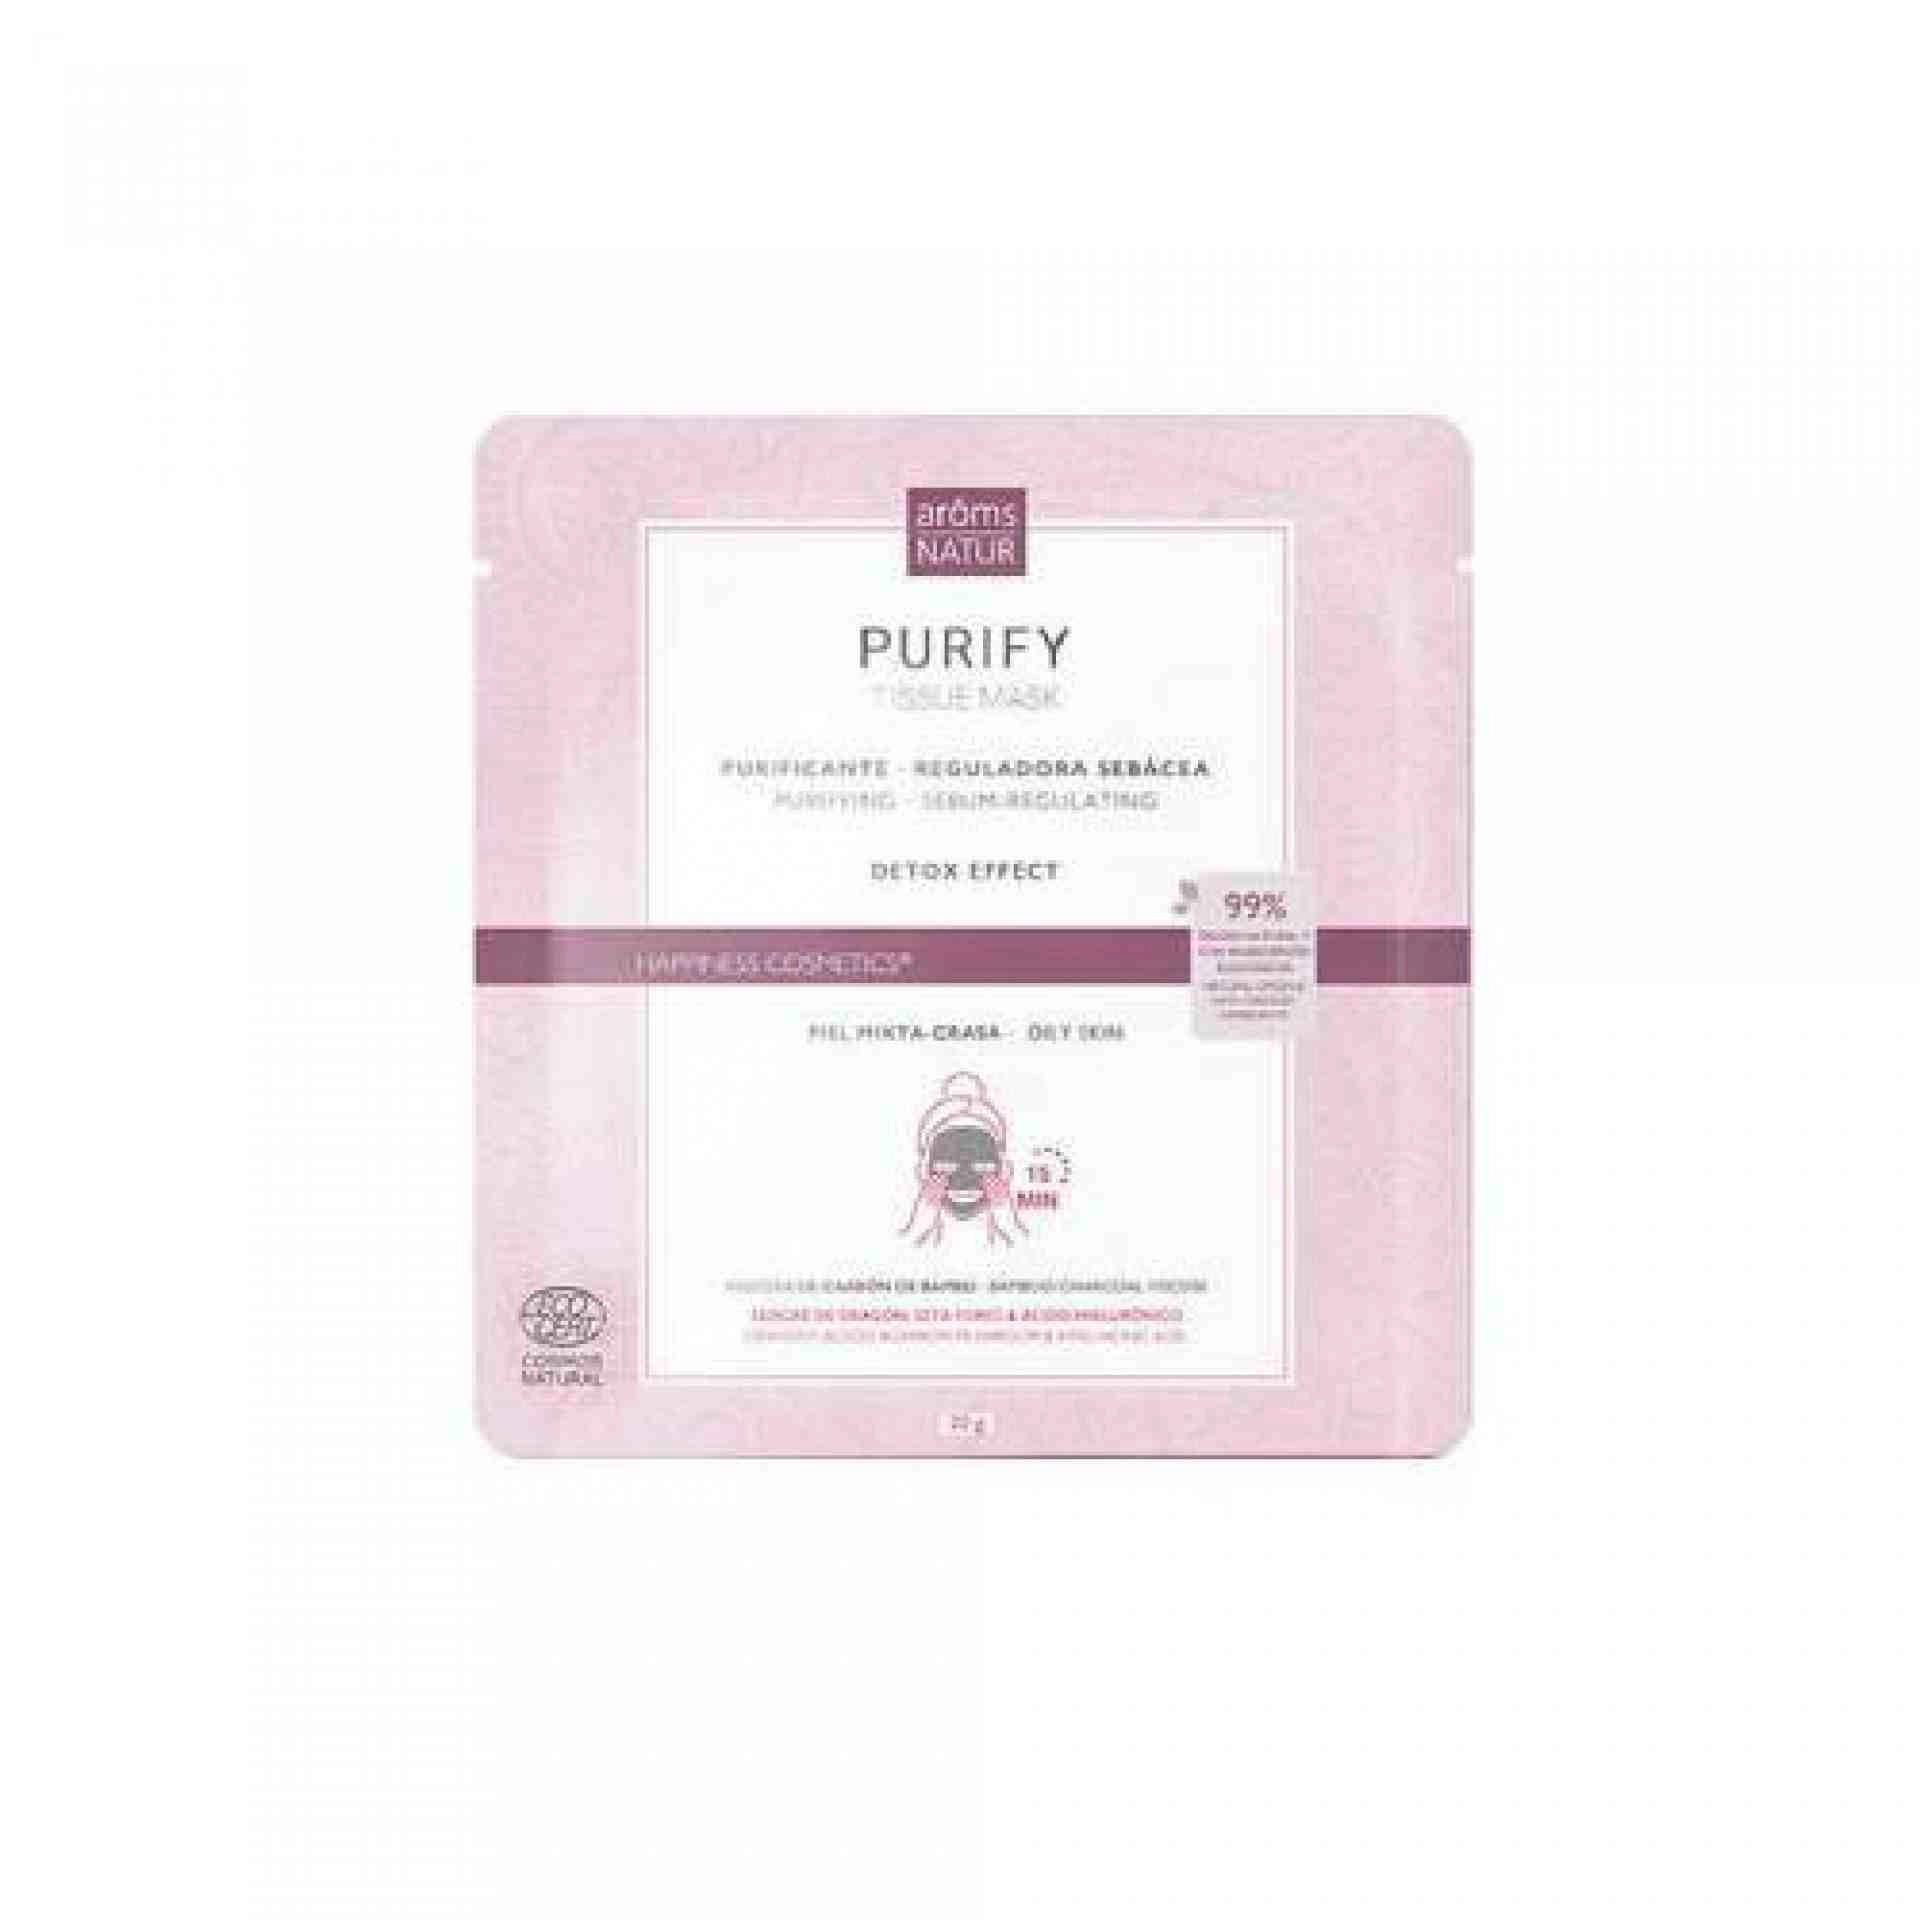 Purify Tissue Mask | Mascarilla purificante 1ud - Happiness Cosmetics - Arôms Natur ®